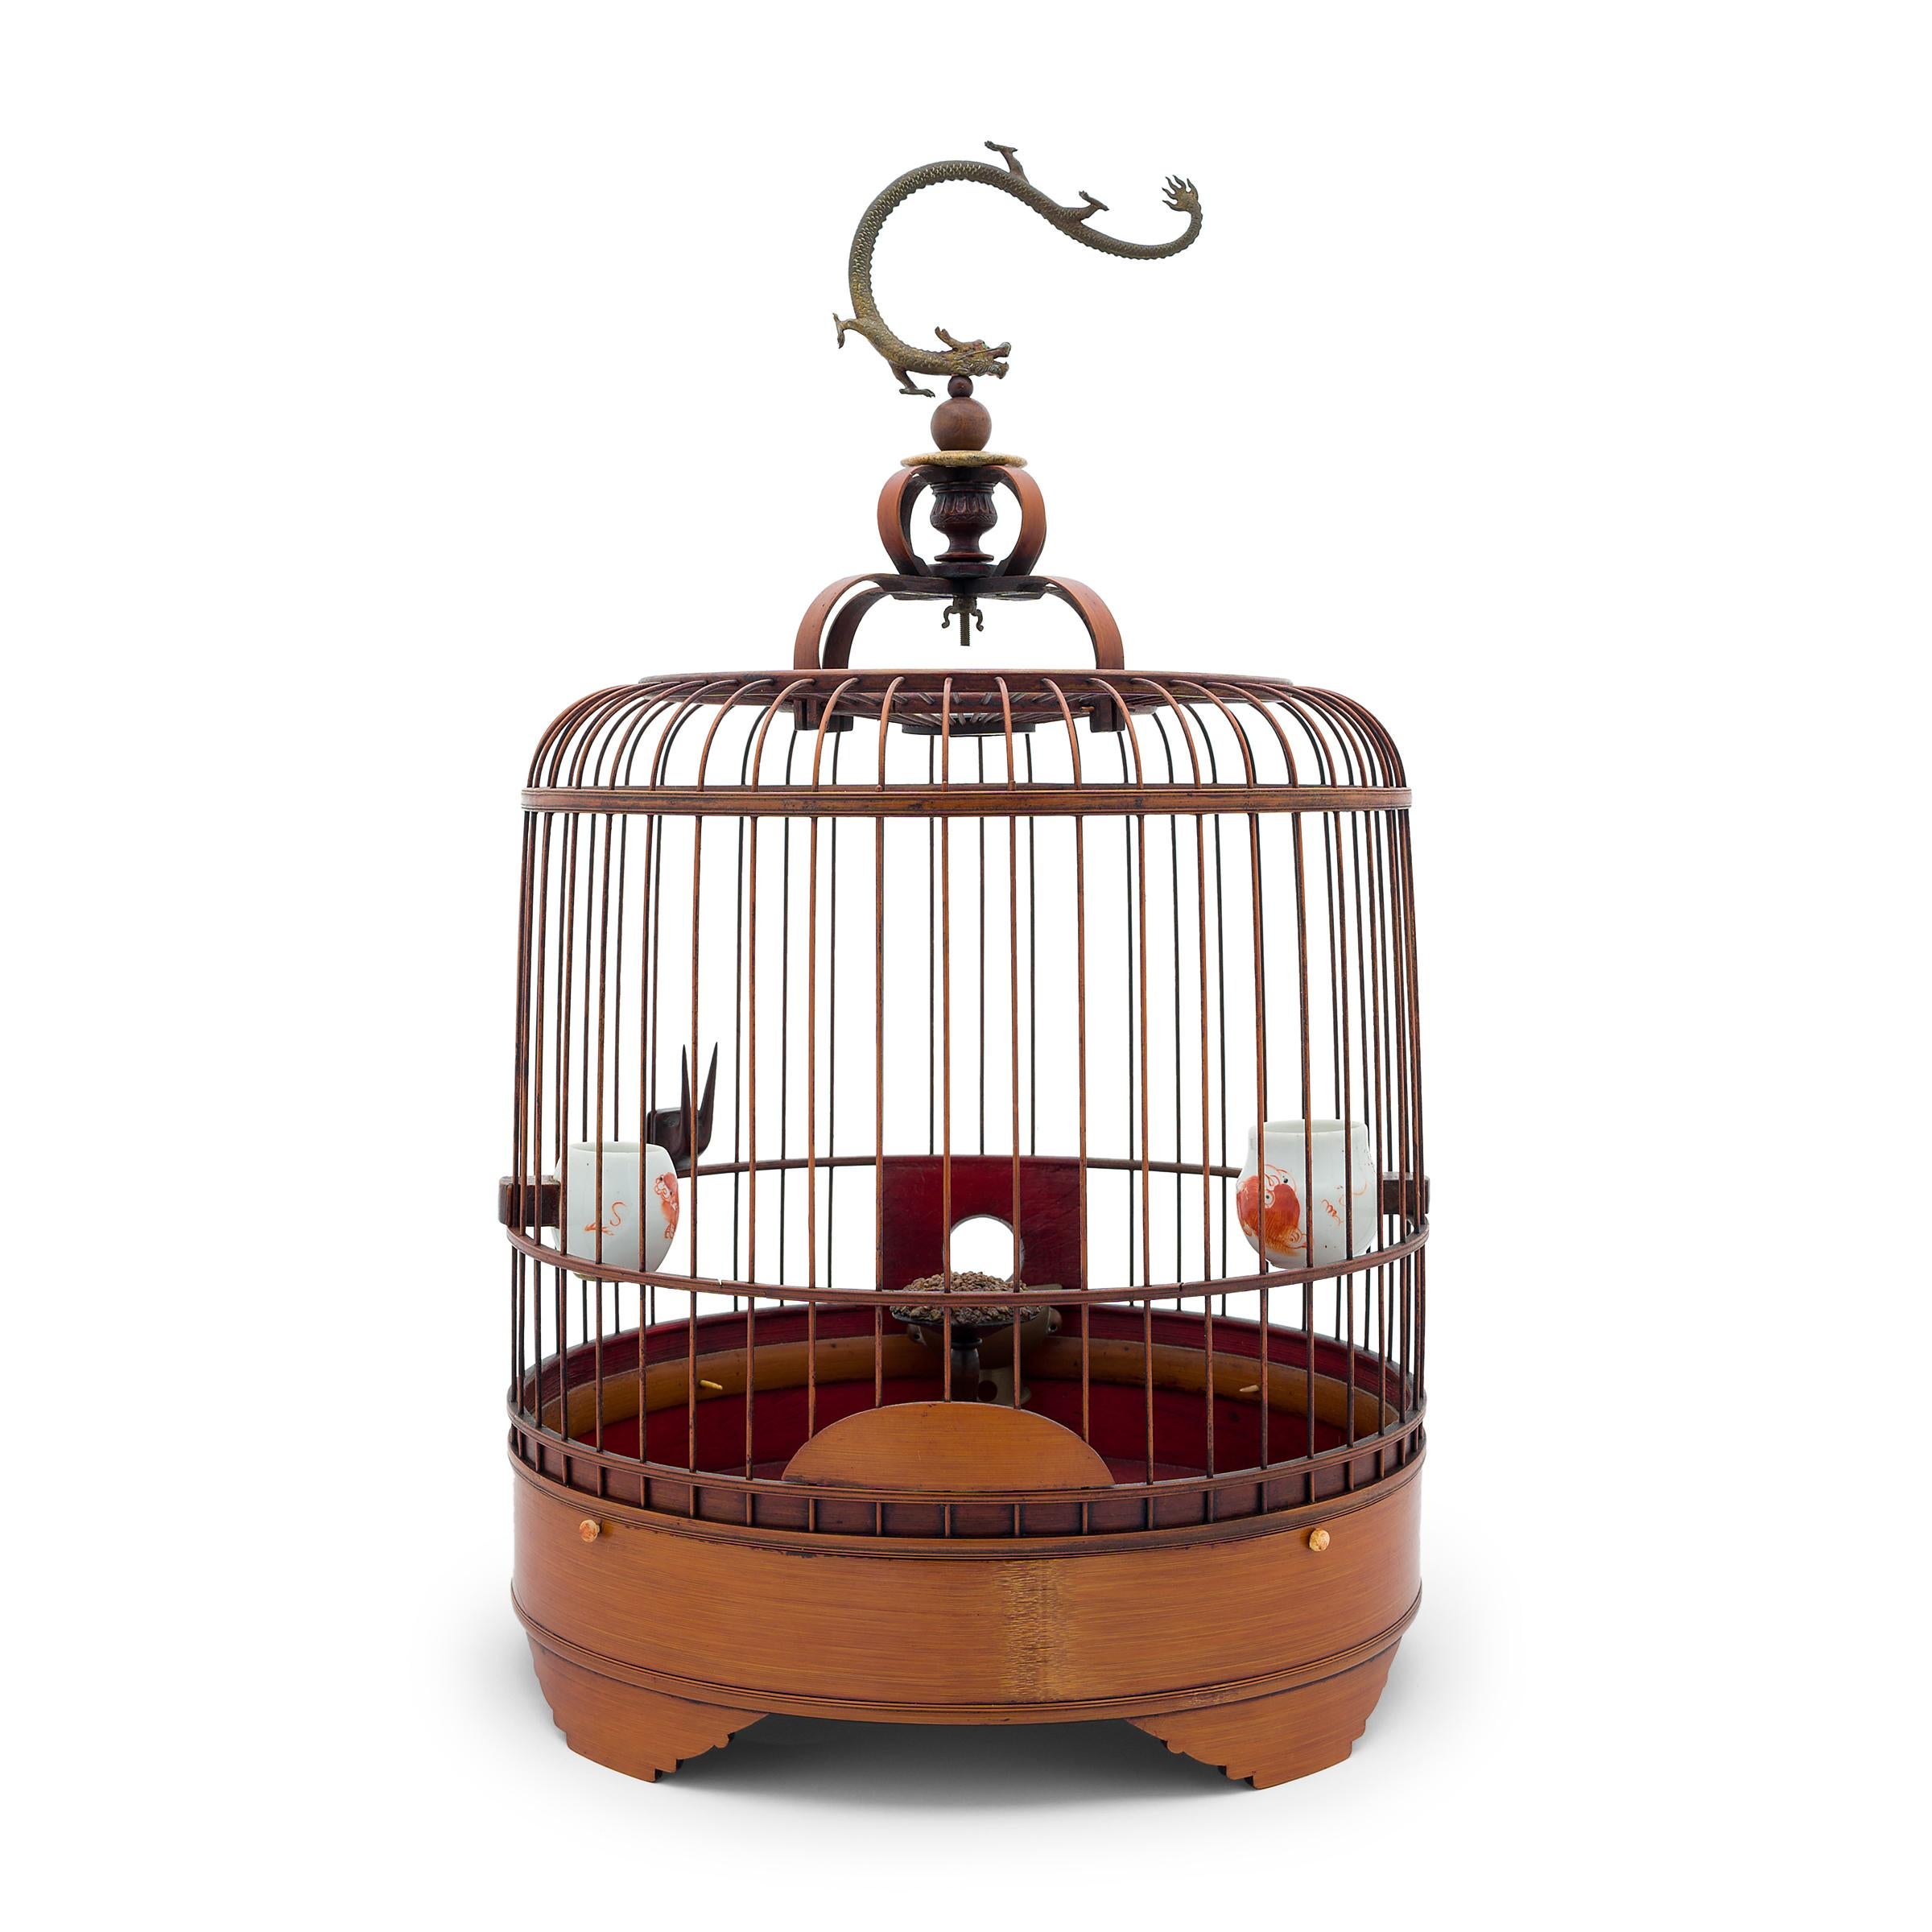 This large, barrel-form birdcage dates to the early 20th century and is carefully assembled of thin bamboo rods fitted to a round bamboo base. The cage hangs from a large hook attached to the top, finely cast in the shape of a sinuous dragon. A